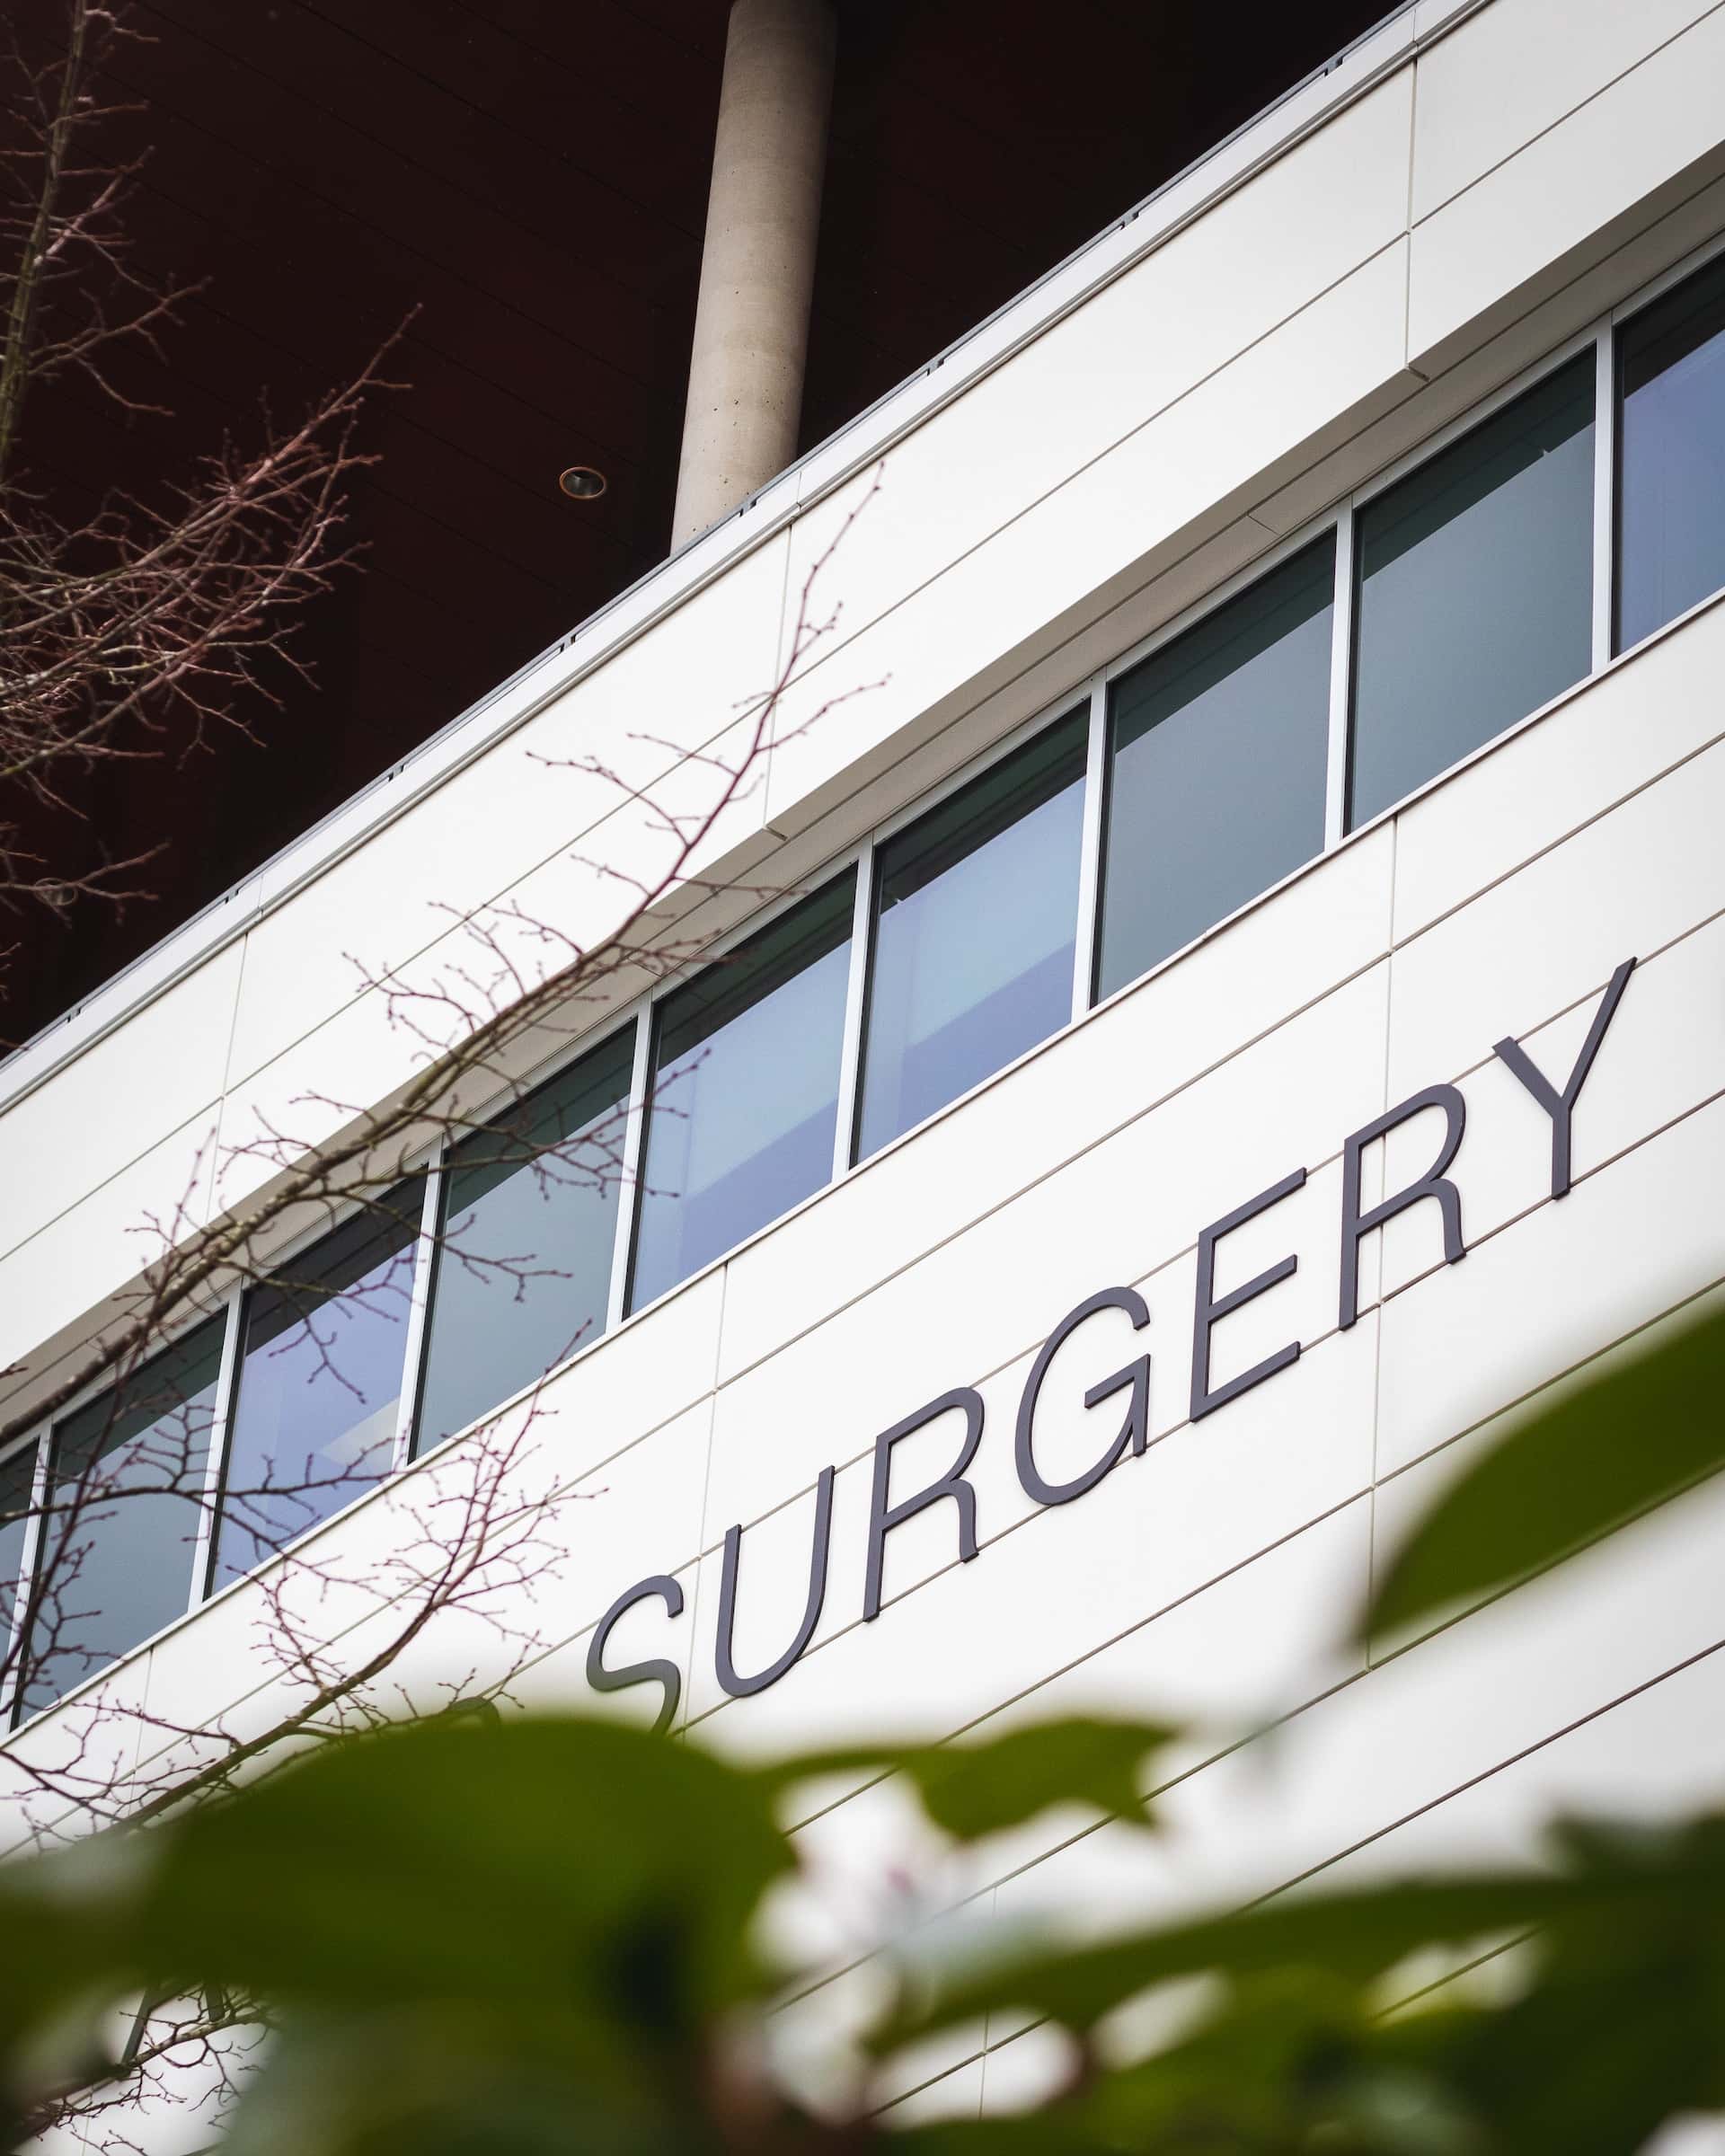 Building with windows and a sign "Surgery"